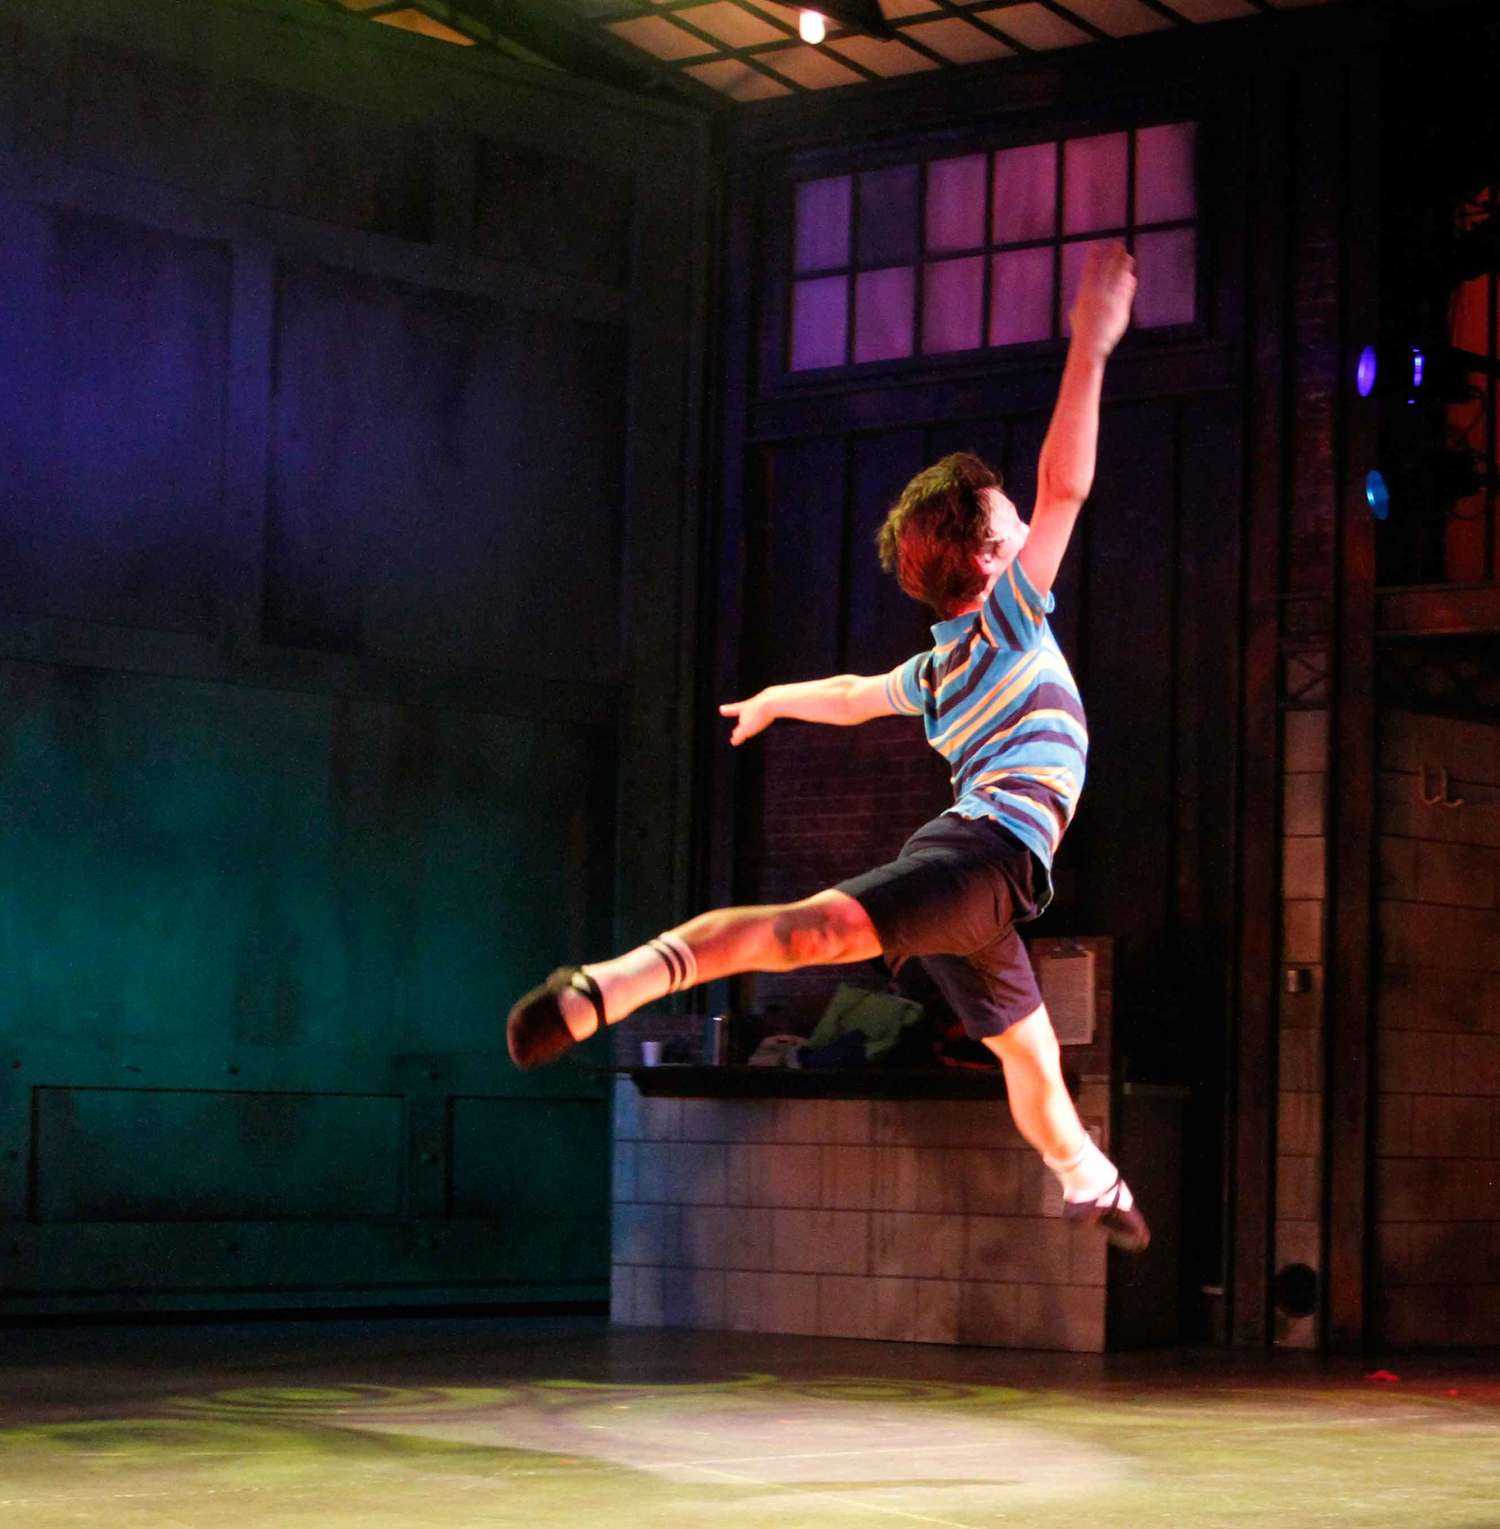 Billy Elliot will leap into your heart!
-Reg Madison Photography